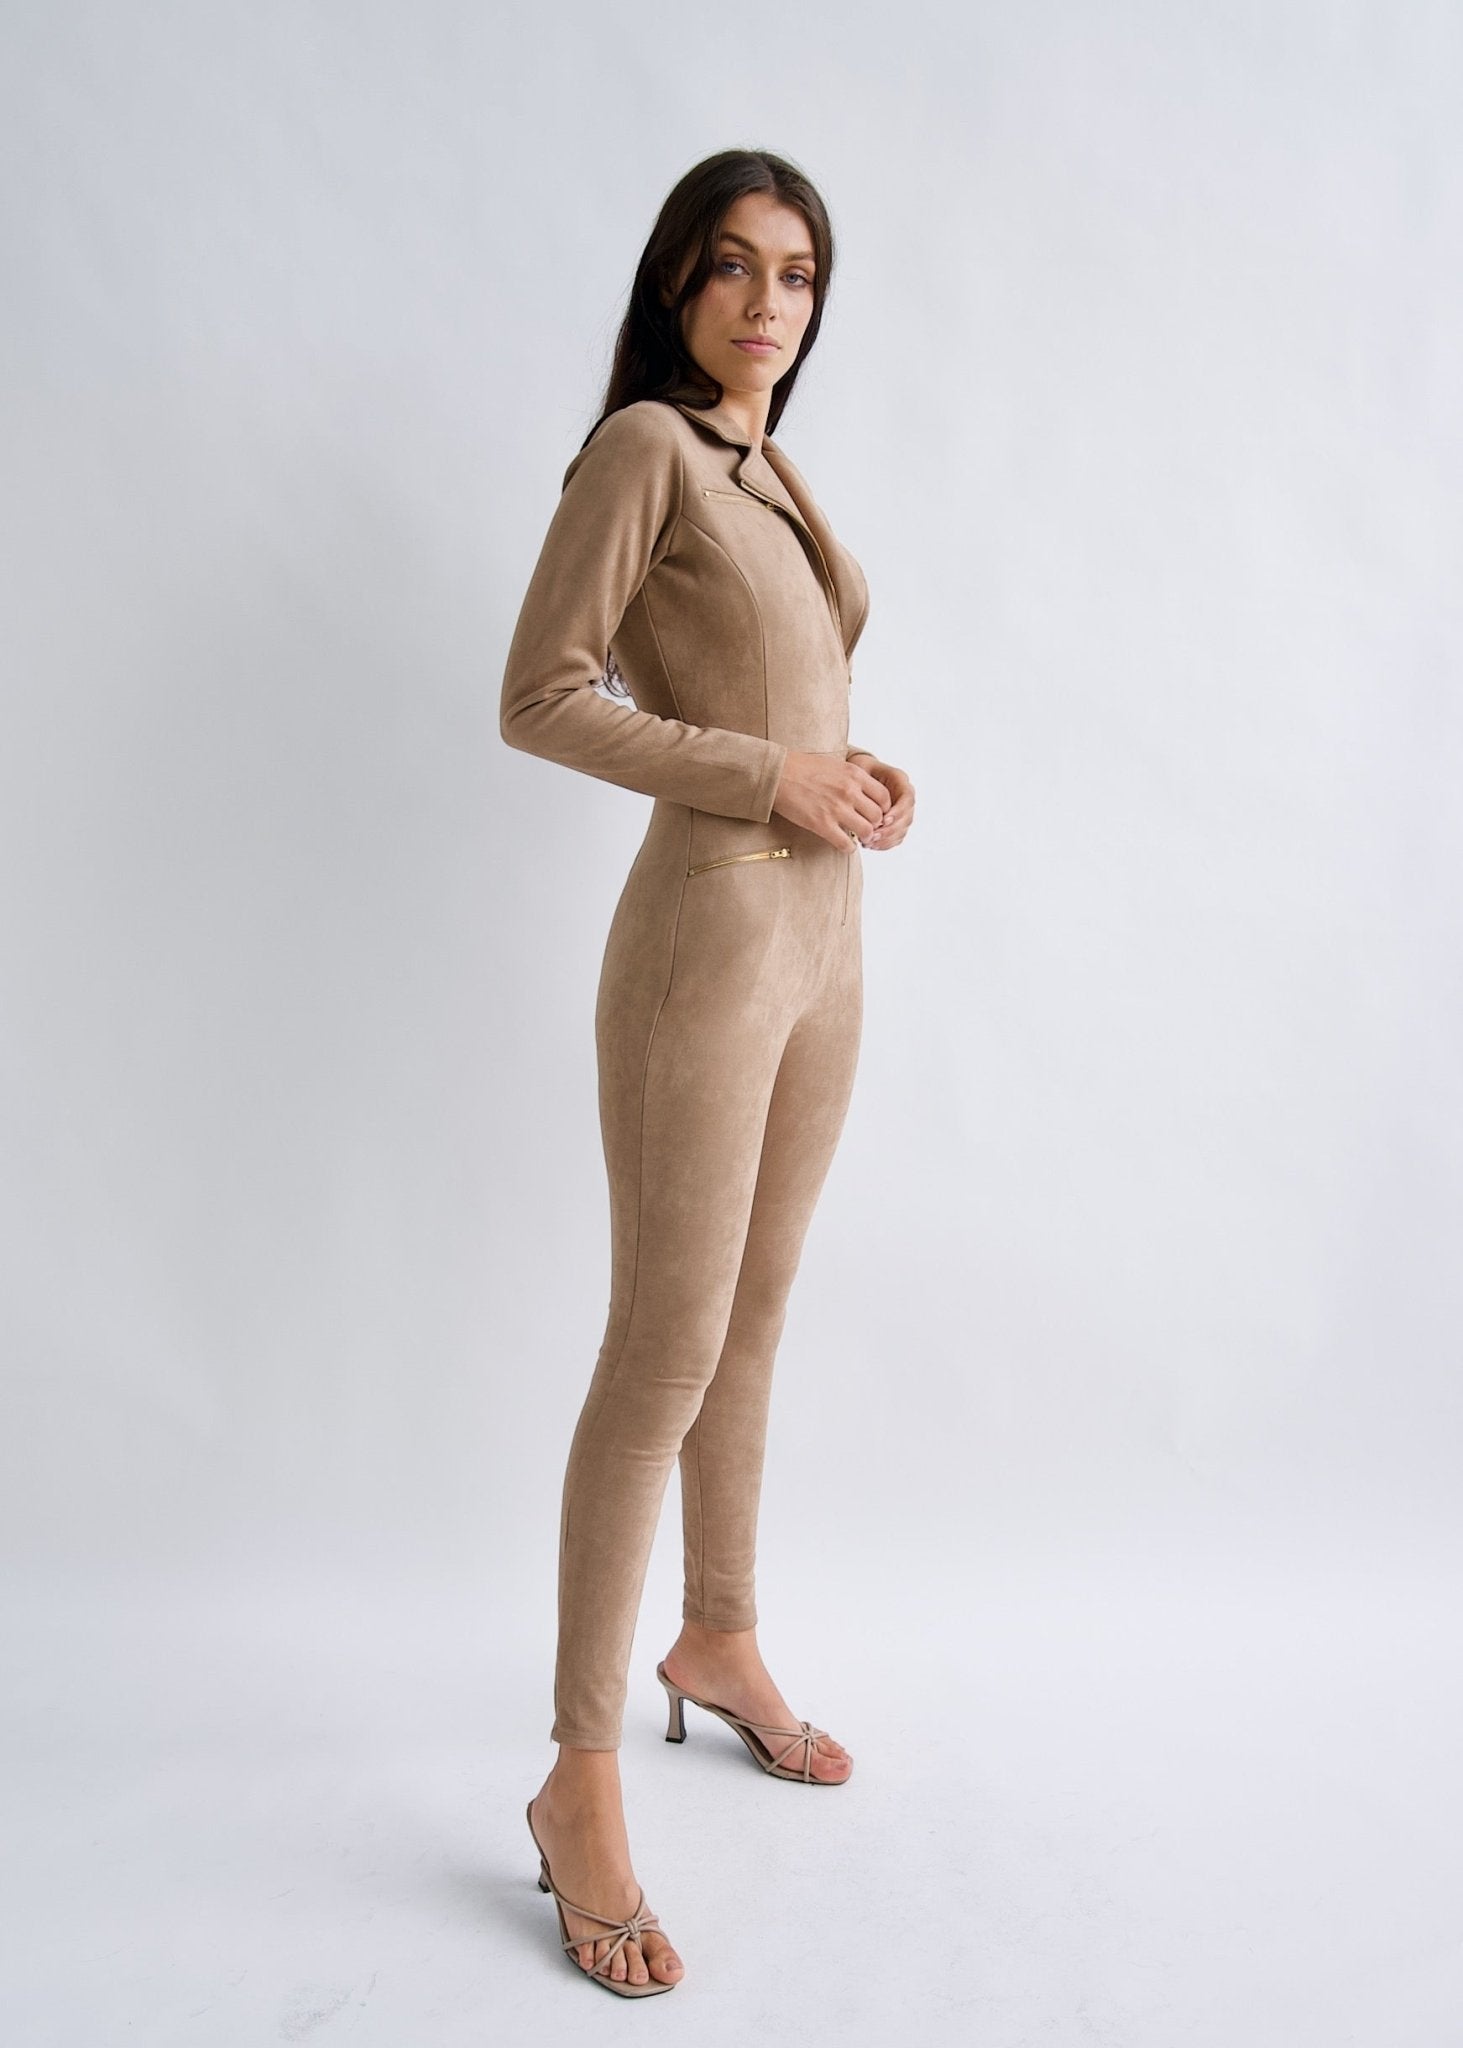 "Emma Peel" Mocha Faux Suede Jumpsuit-Why Mary-stride